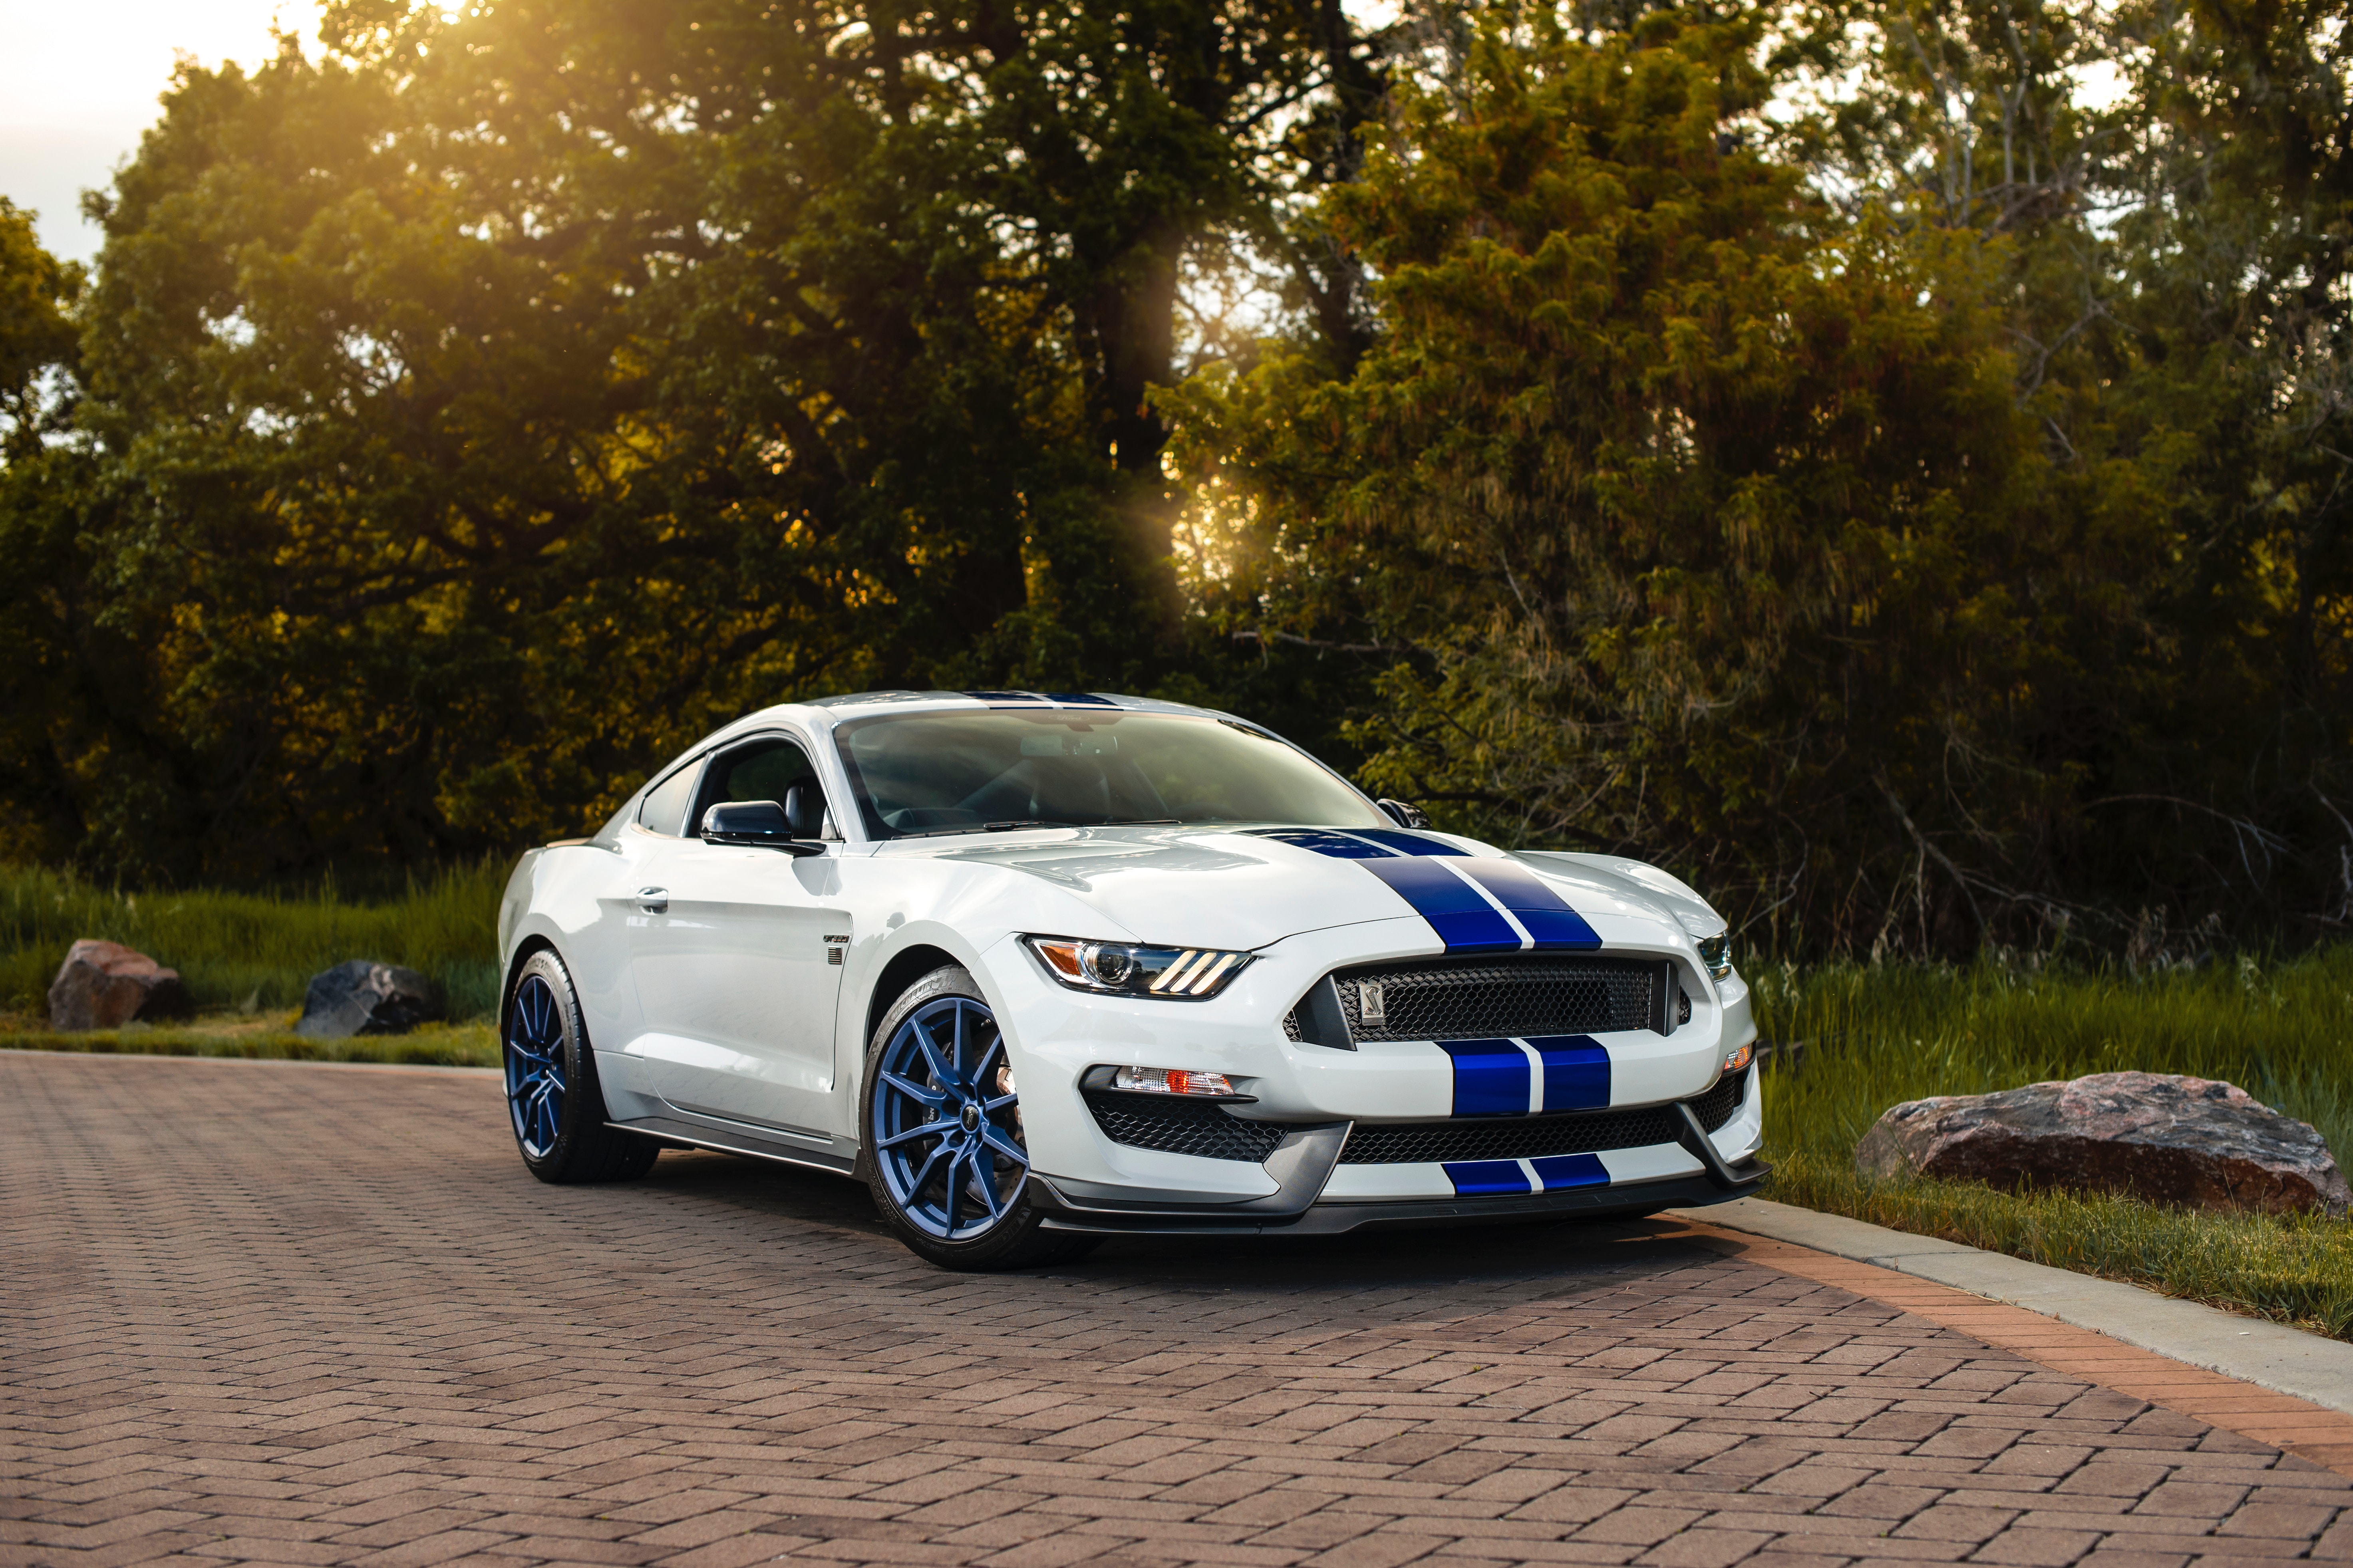 Car Ford Muscle Car Shelby Mustang Gt 350 Vehicle White Car 5890x3926